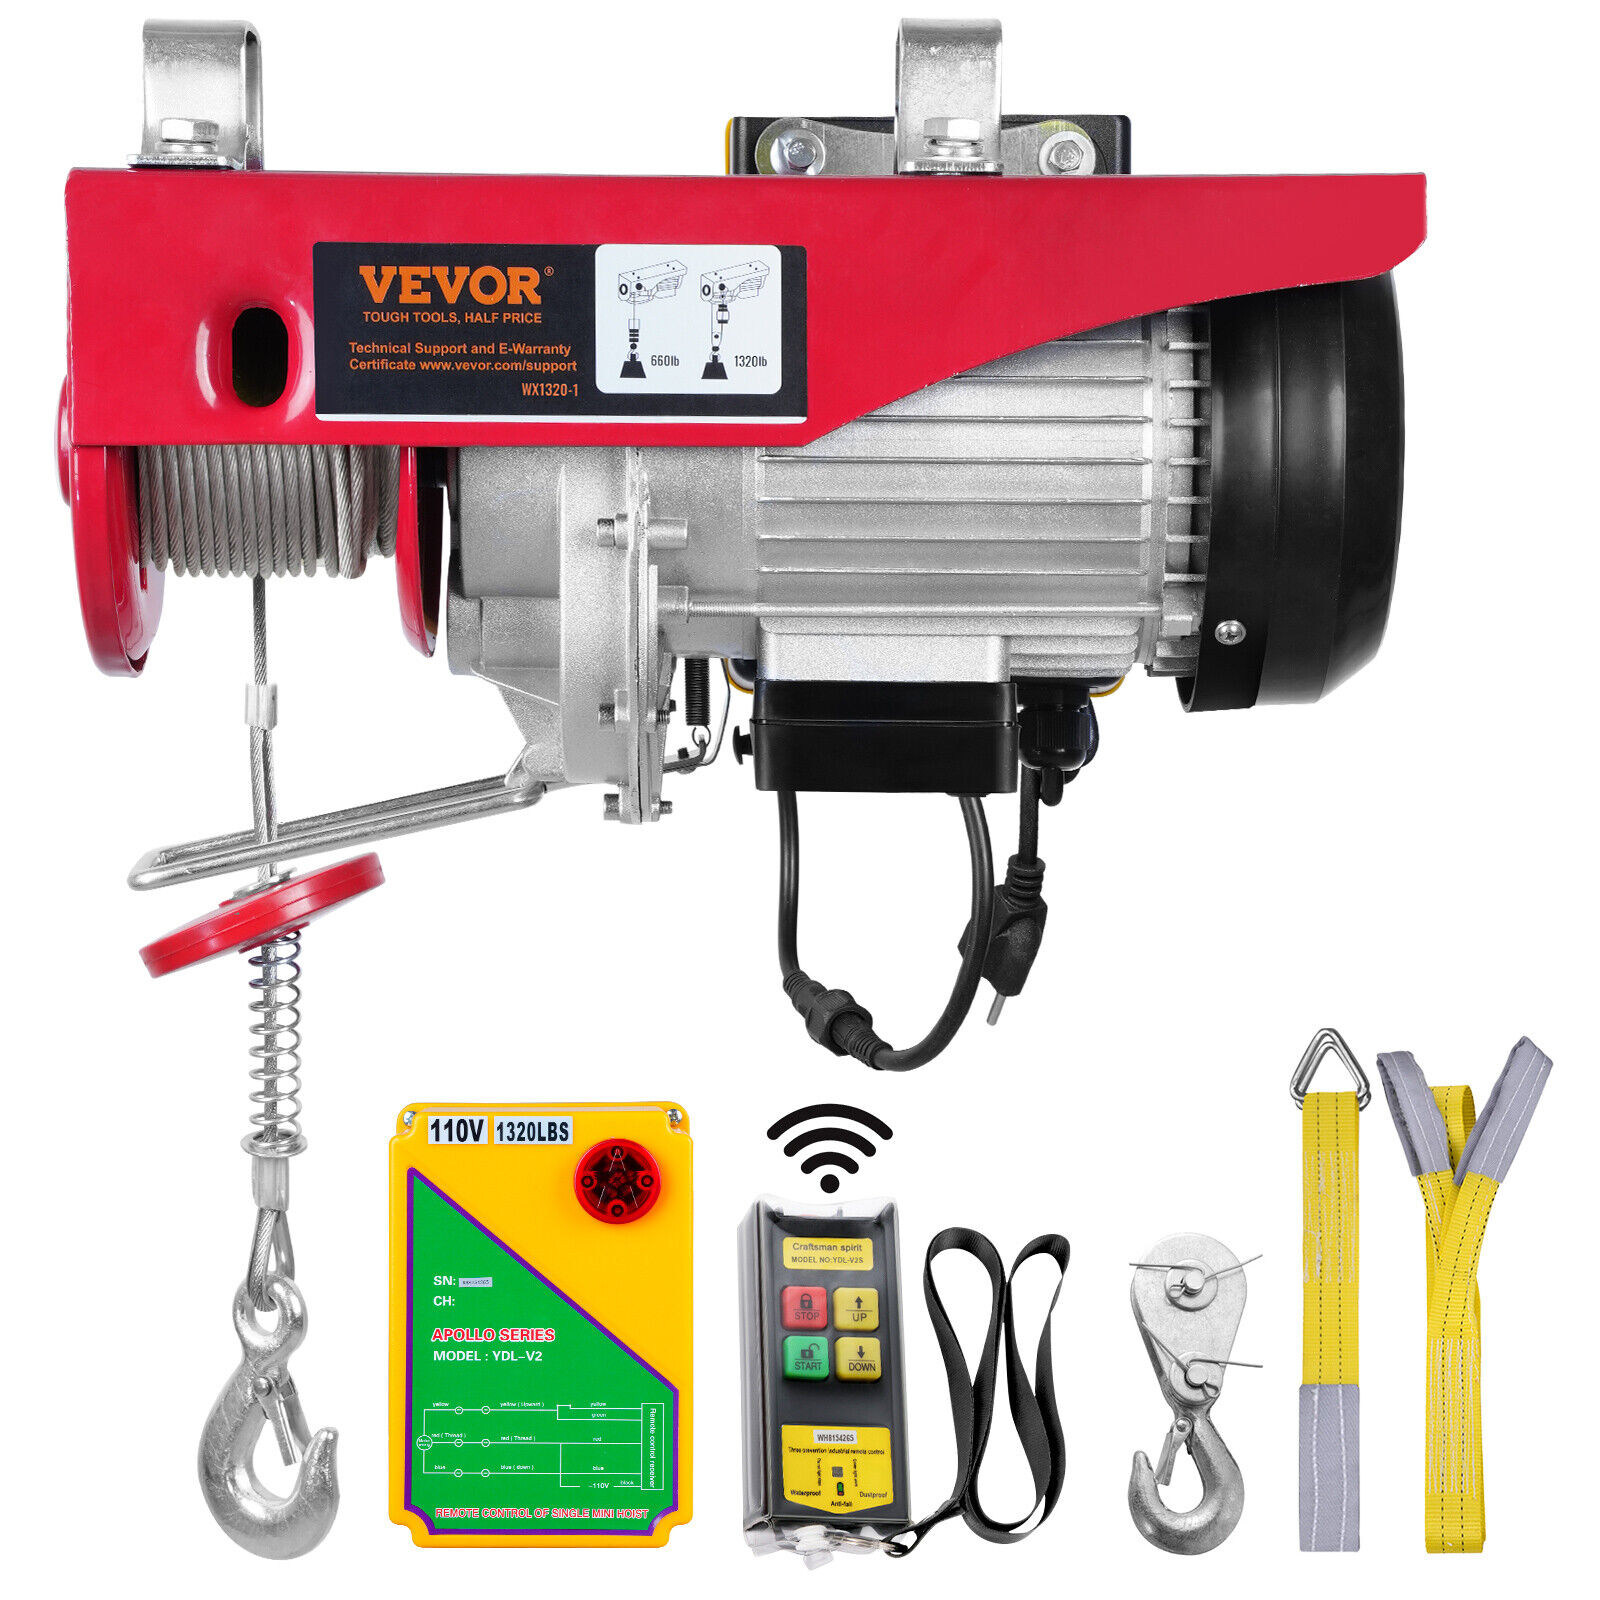 VEVOR Electric Hoist 110V Electric Winch 1320lbs with Wireless Remote Control